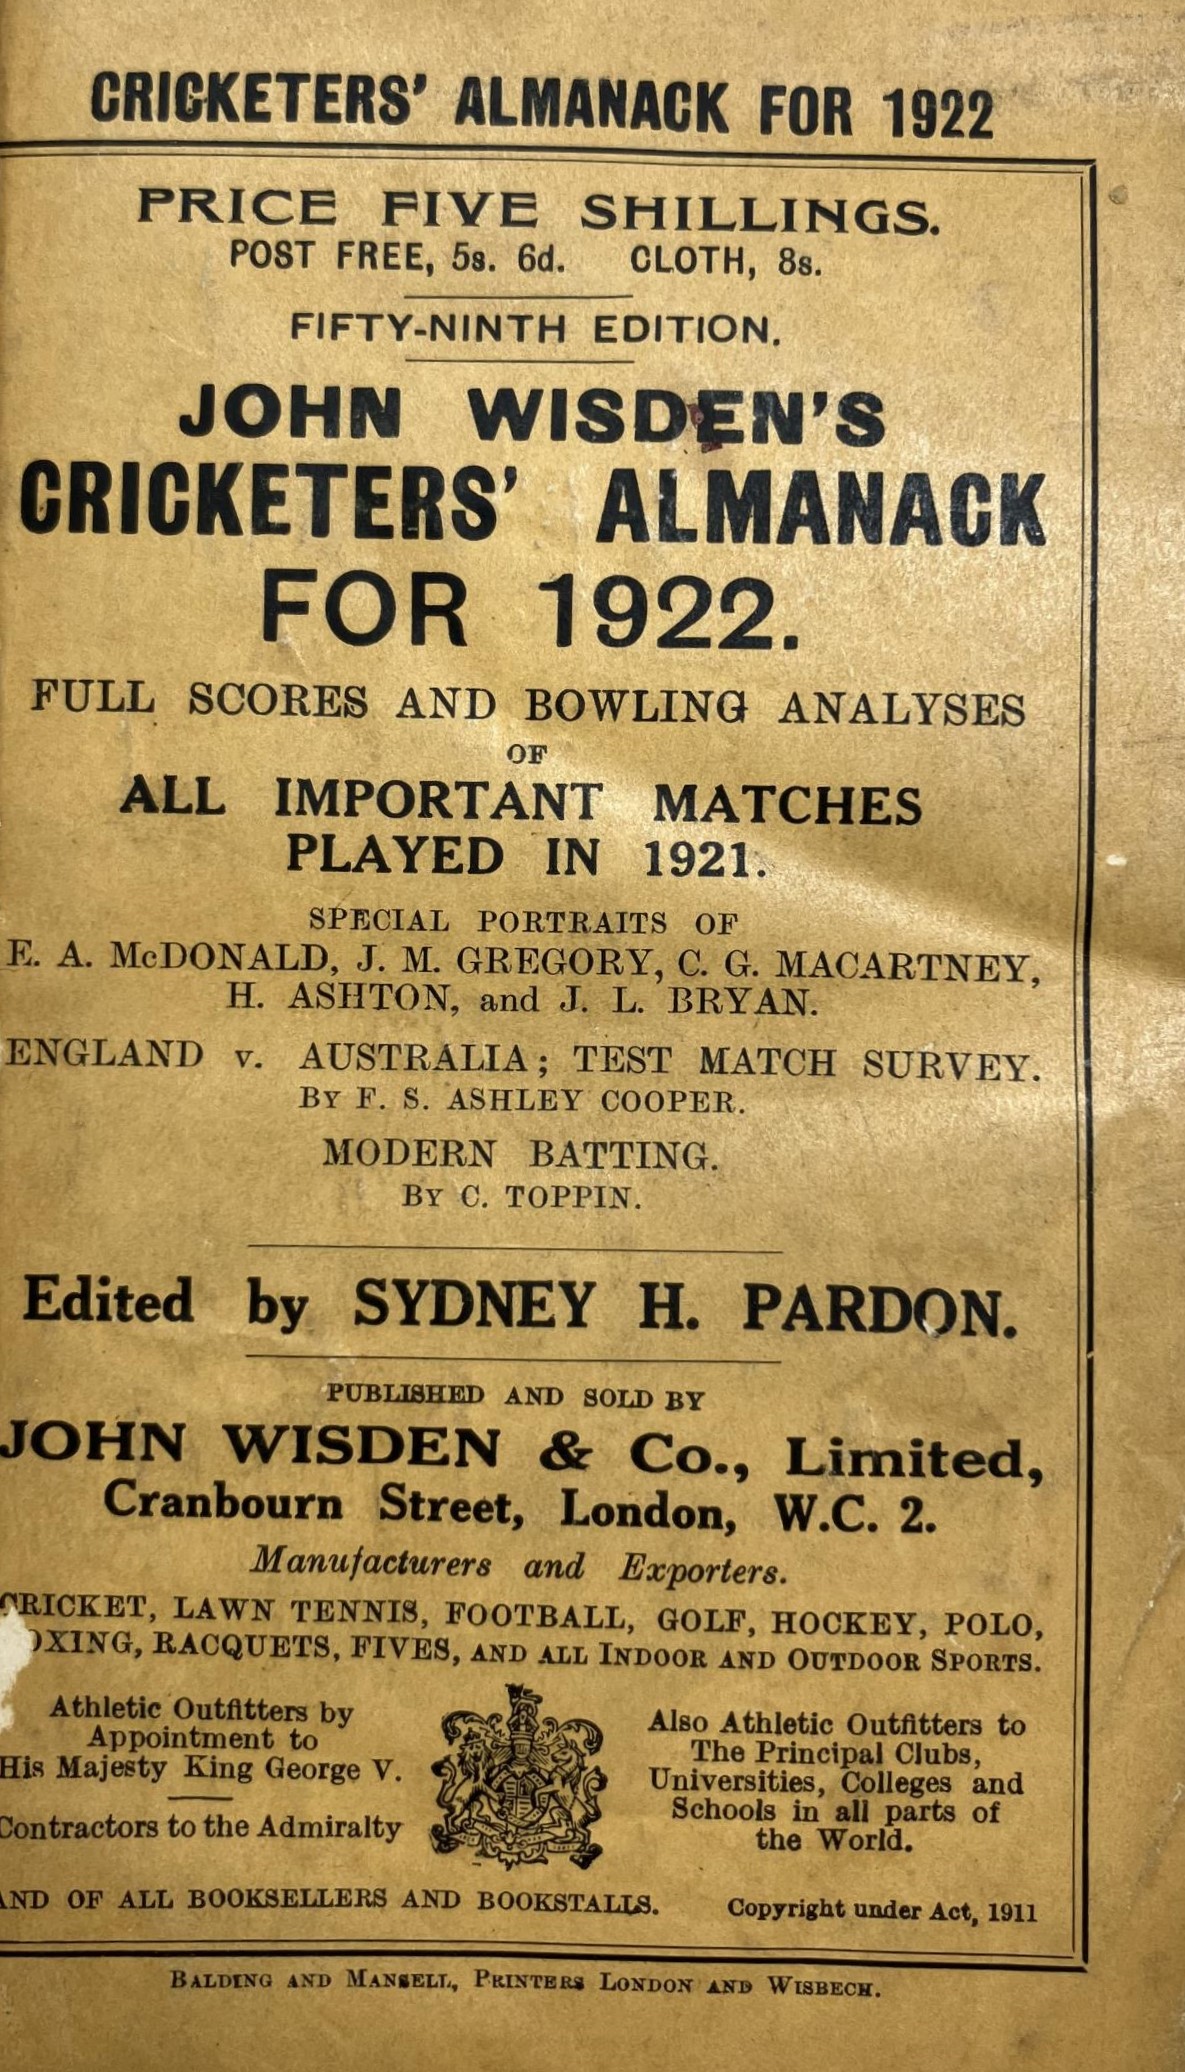 A Wisden Cricketers' Almanack, 1922 Provenance:  From the Harry Brewer Cricket Memorabilia - Image 3 of 4